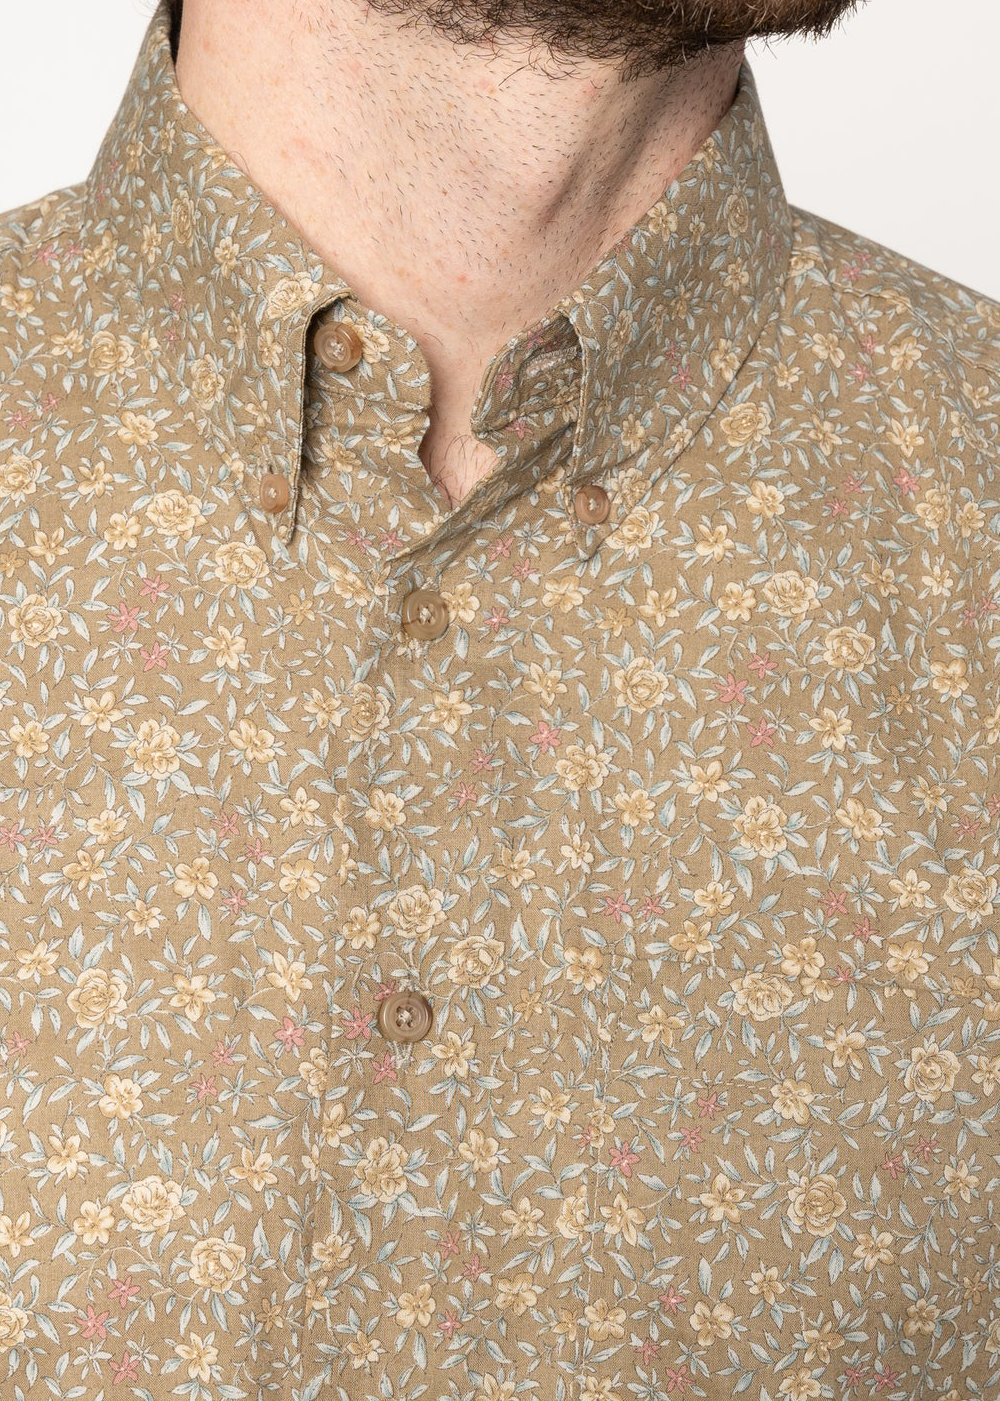 Easy Shirt - Bell Flowers - Cinnamon - Naked and Famous Denim Canada - Danali - 120118811